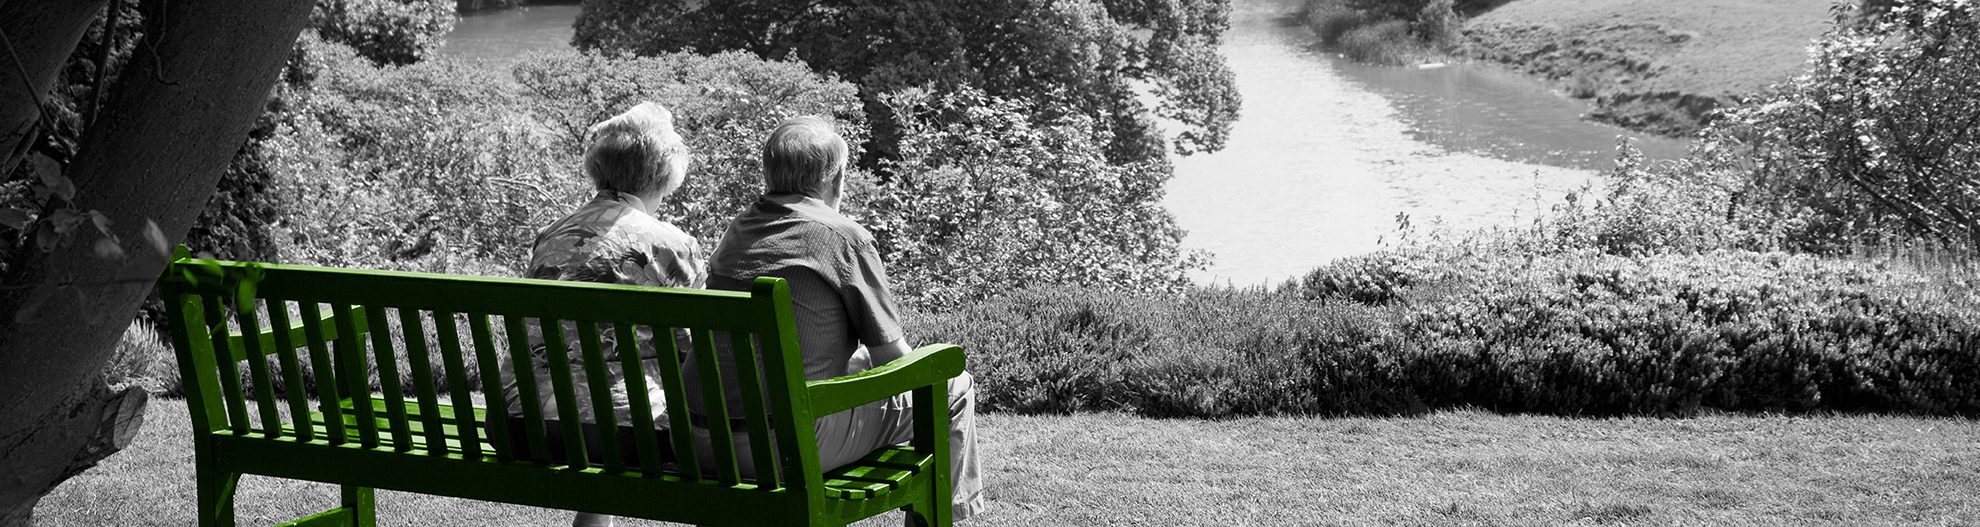 Retired Couple On Bench